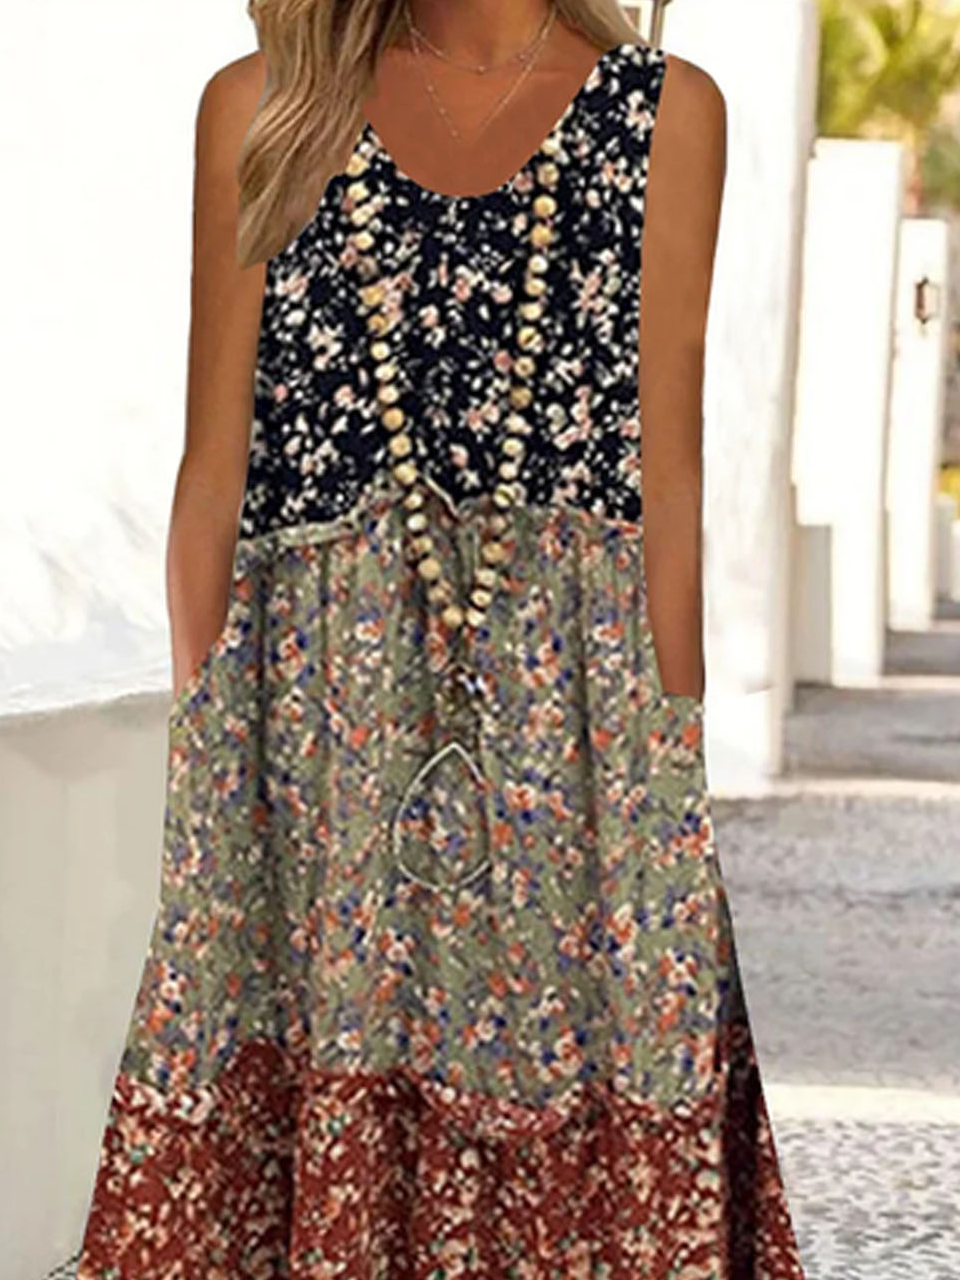 Loose Casual Floral Pritned Dress